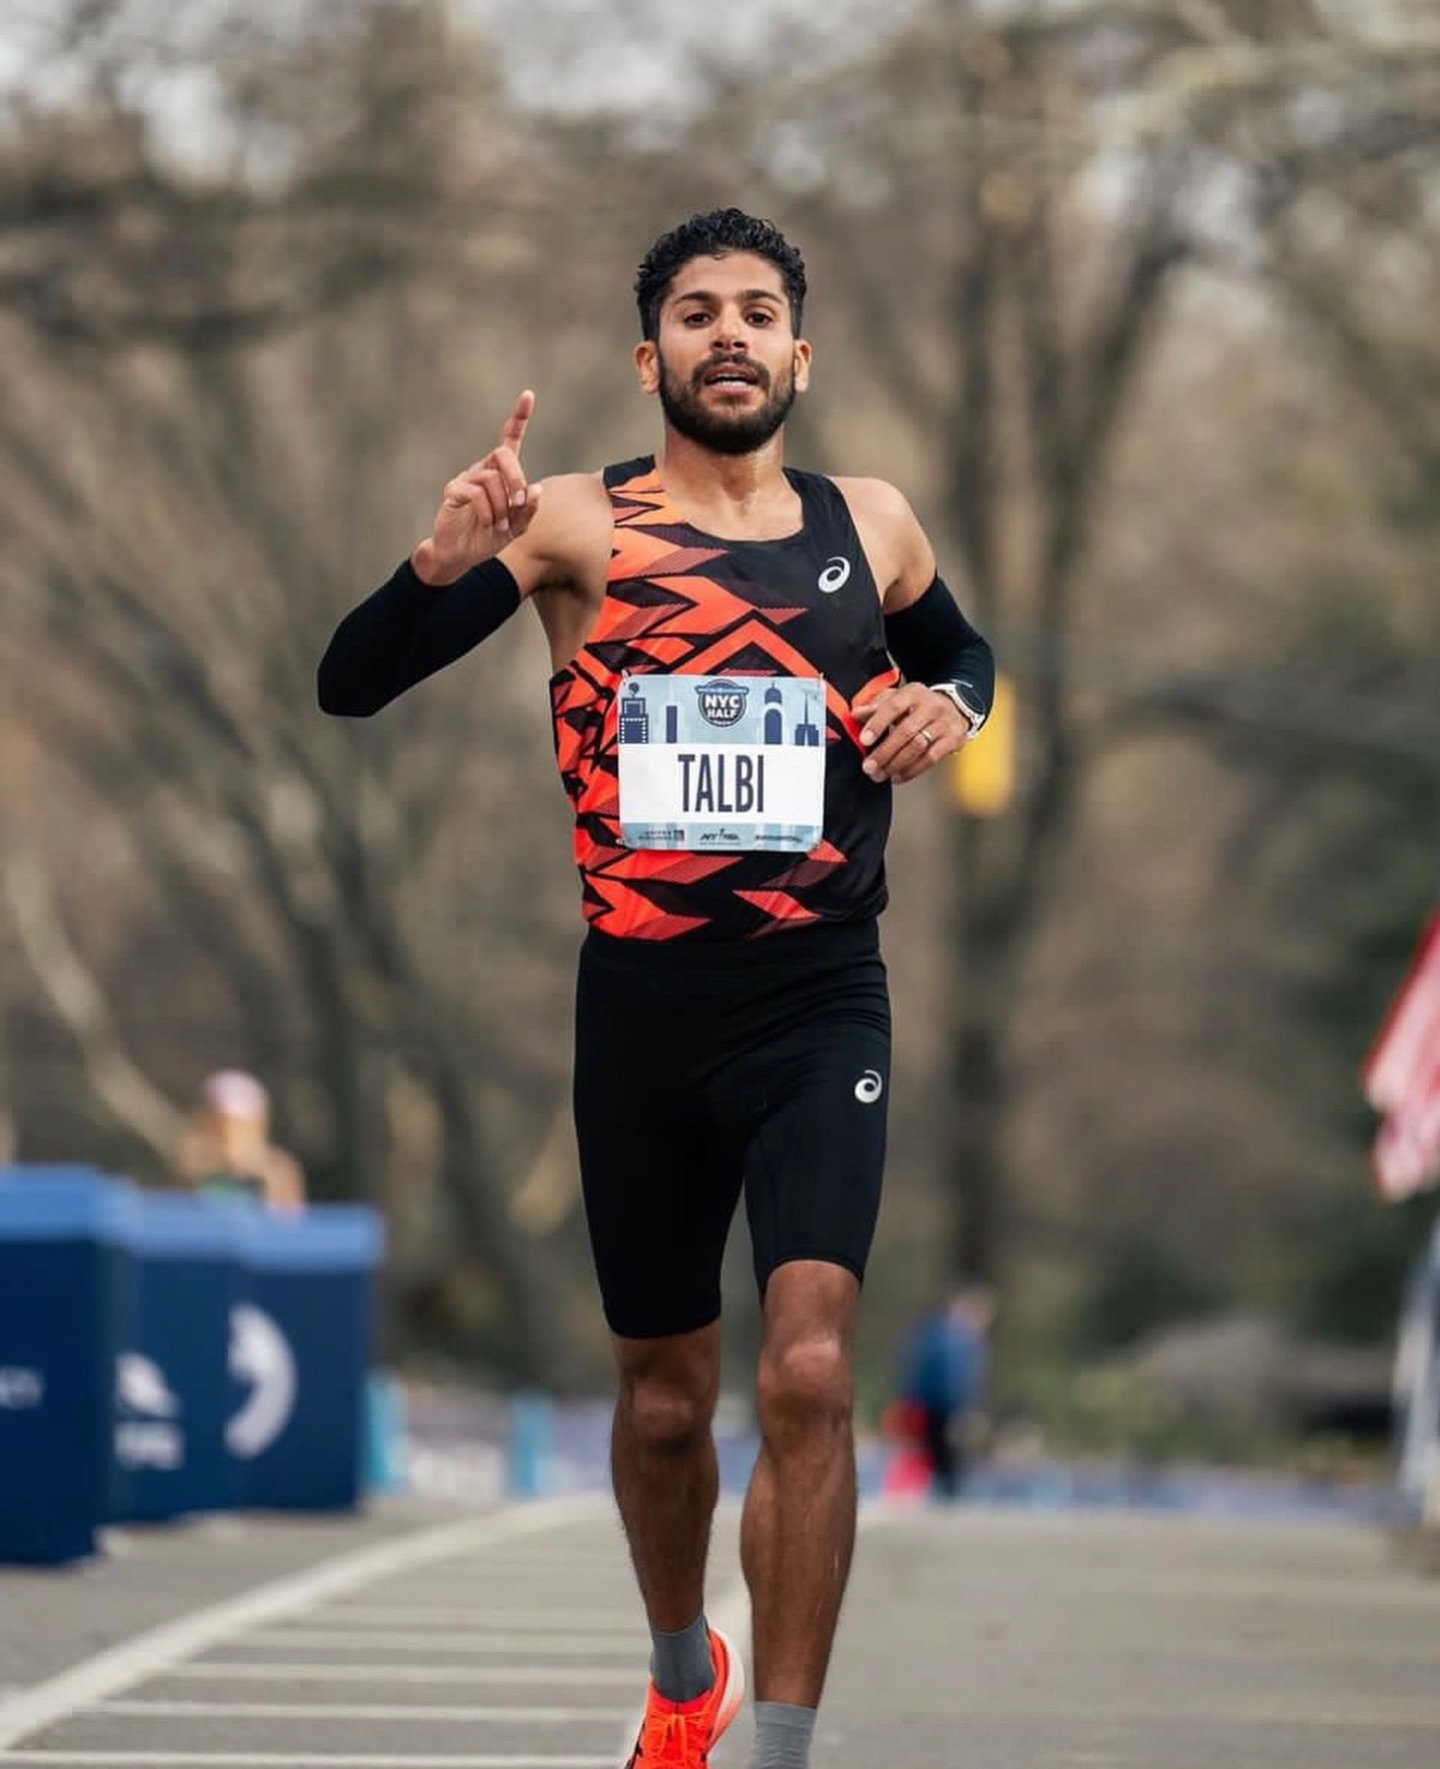 Congratulations to OCU alum @zouhairathle who placed 2nd in this morning&rsquo;s United Airlines NYC Half with a personal best time of 1:00:41! 👟🥈

📷: @jzsnapz